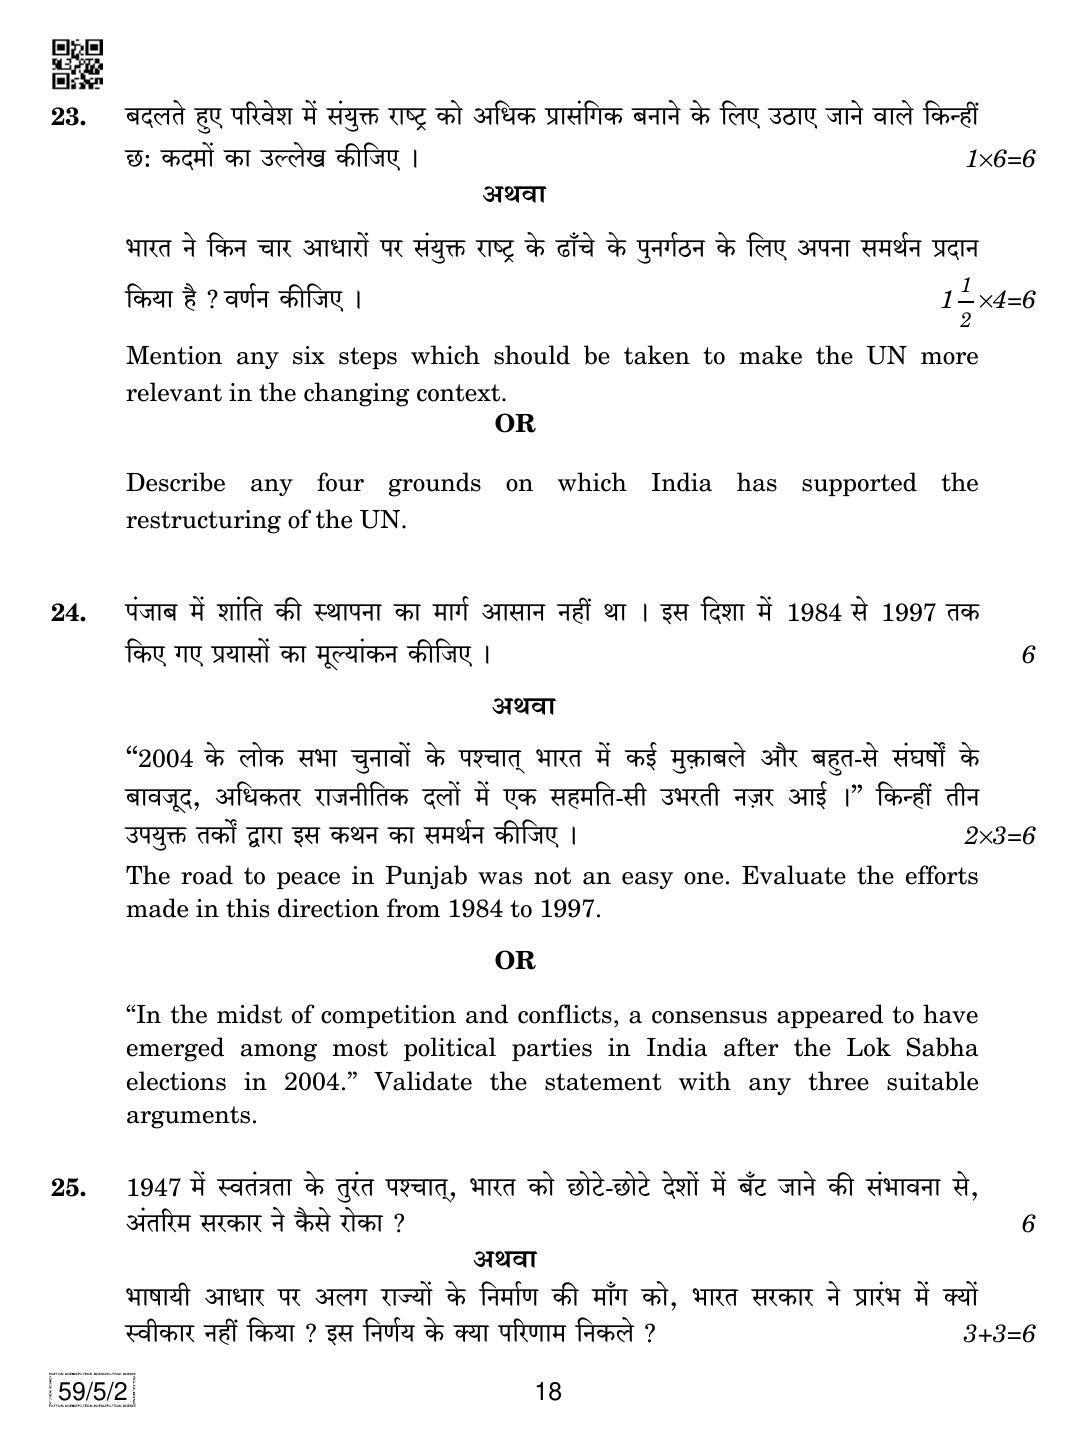 CBSE Class 12 59-5-2 Political Science 2019 Question Paper - Page 18